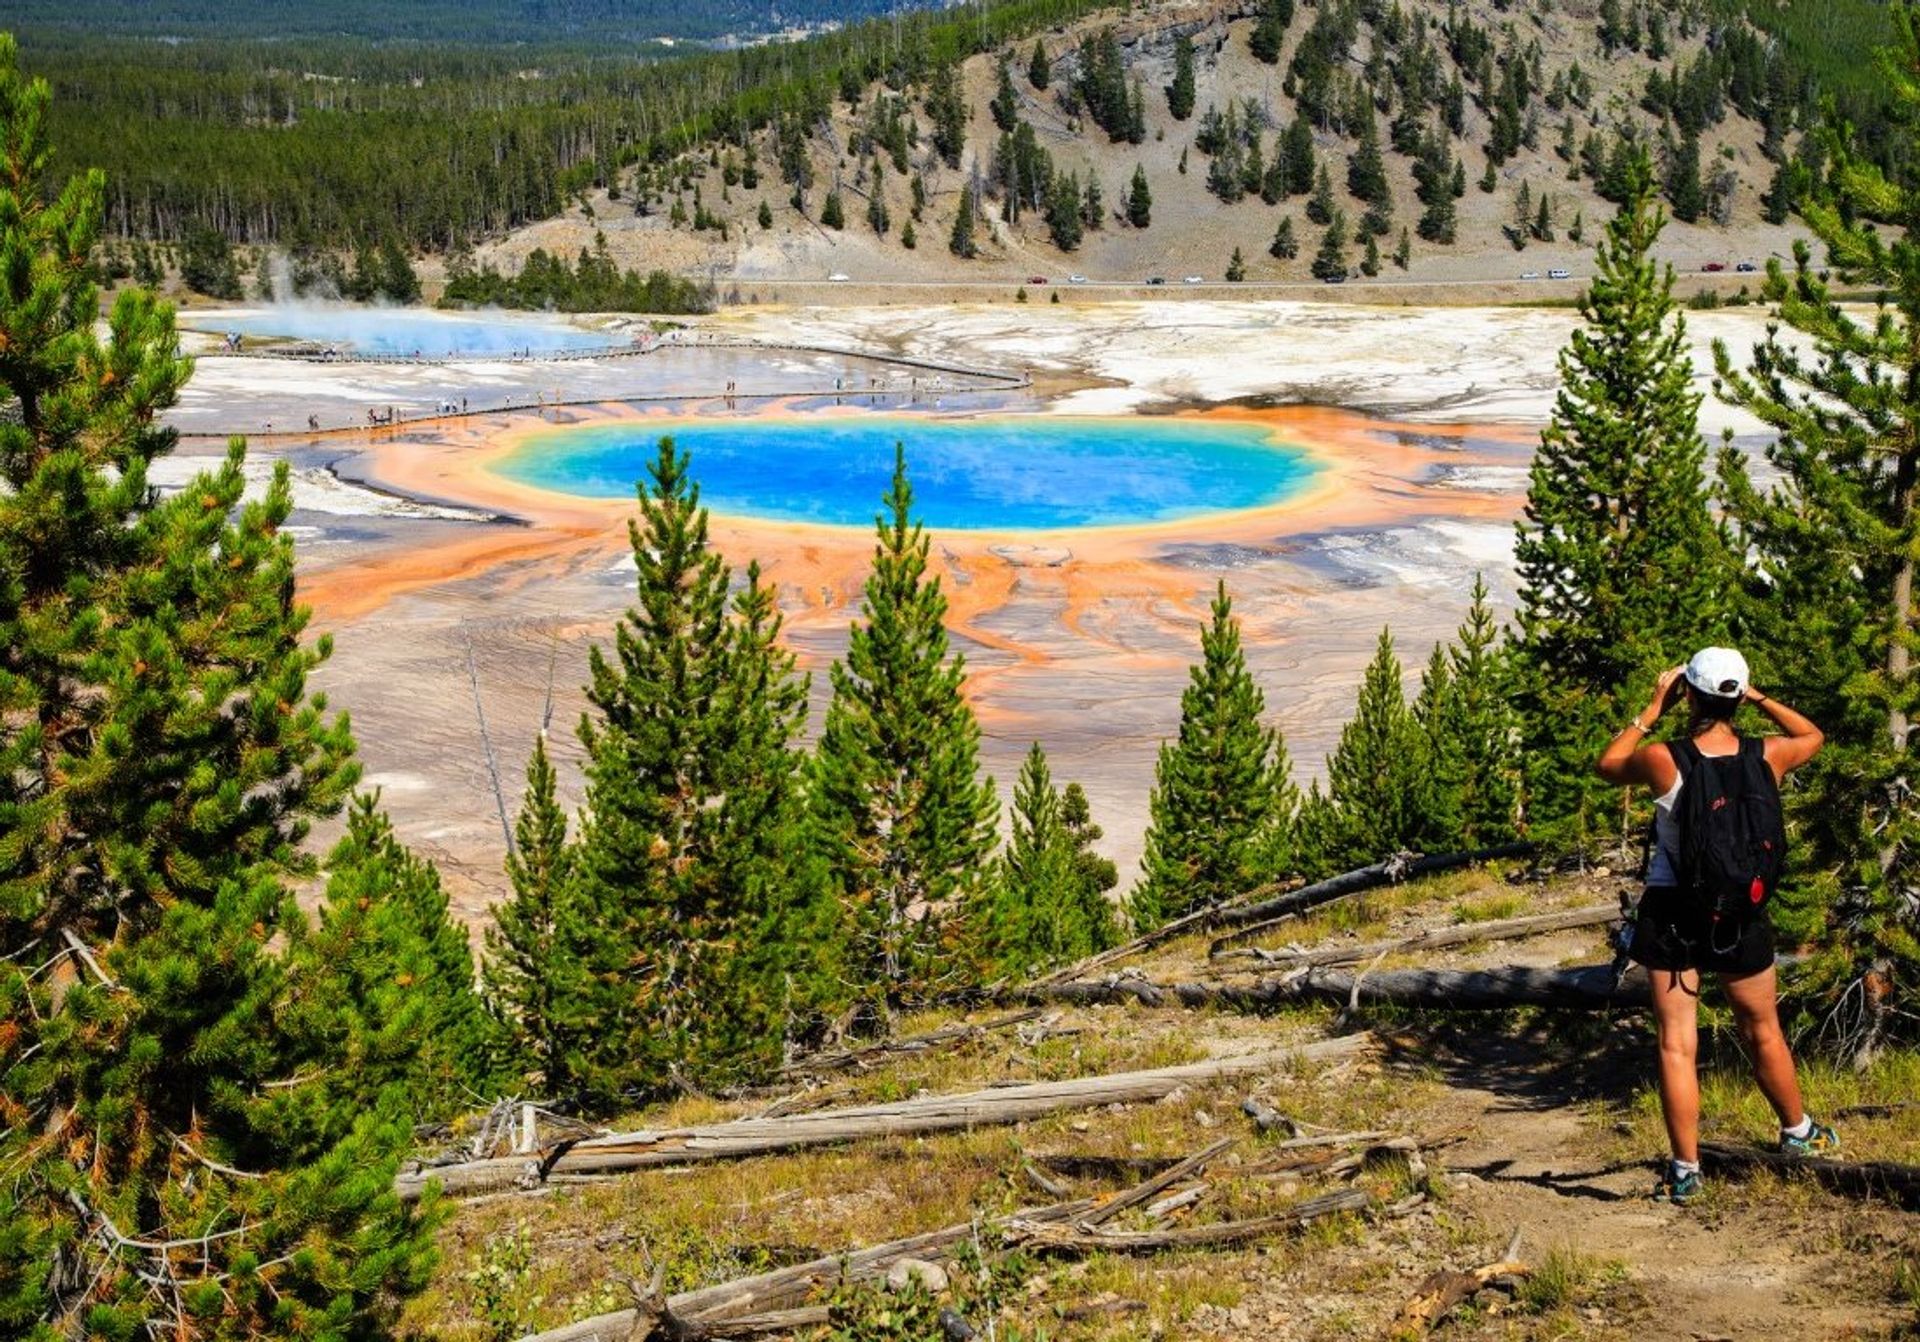 Become one with nature at Yellowstone National Park, home to canyons, rivers, hot springs and forests